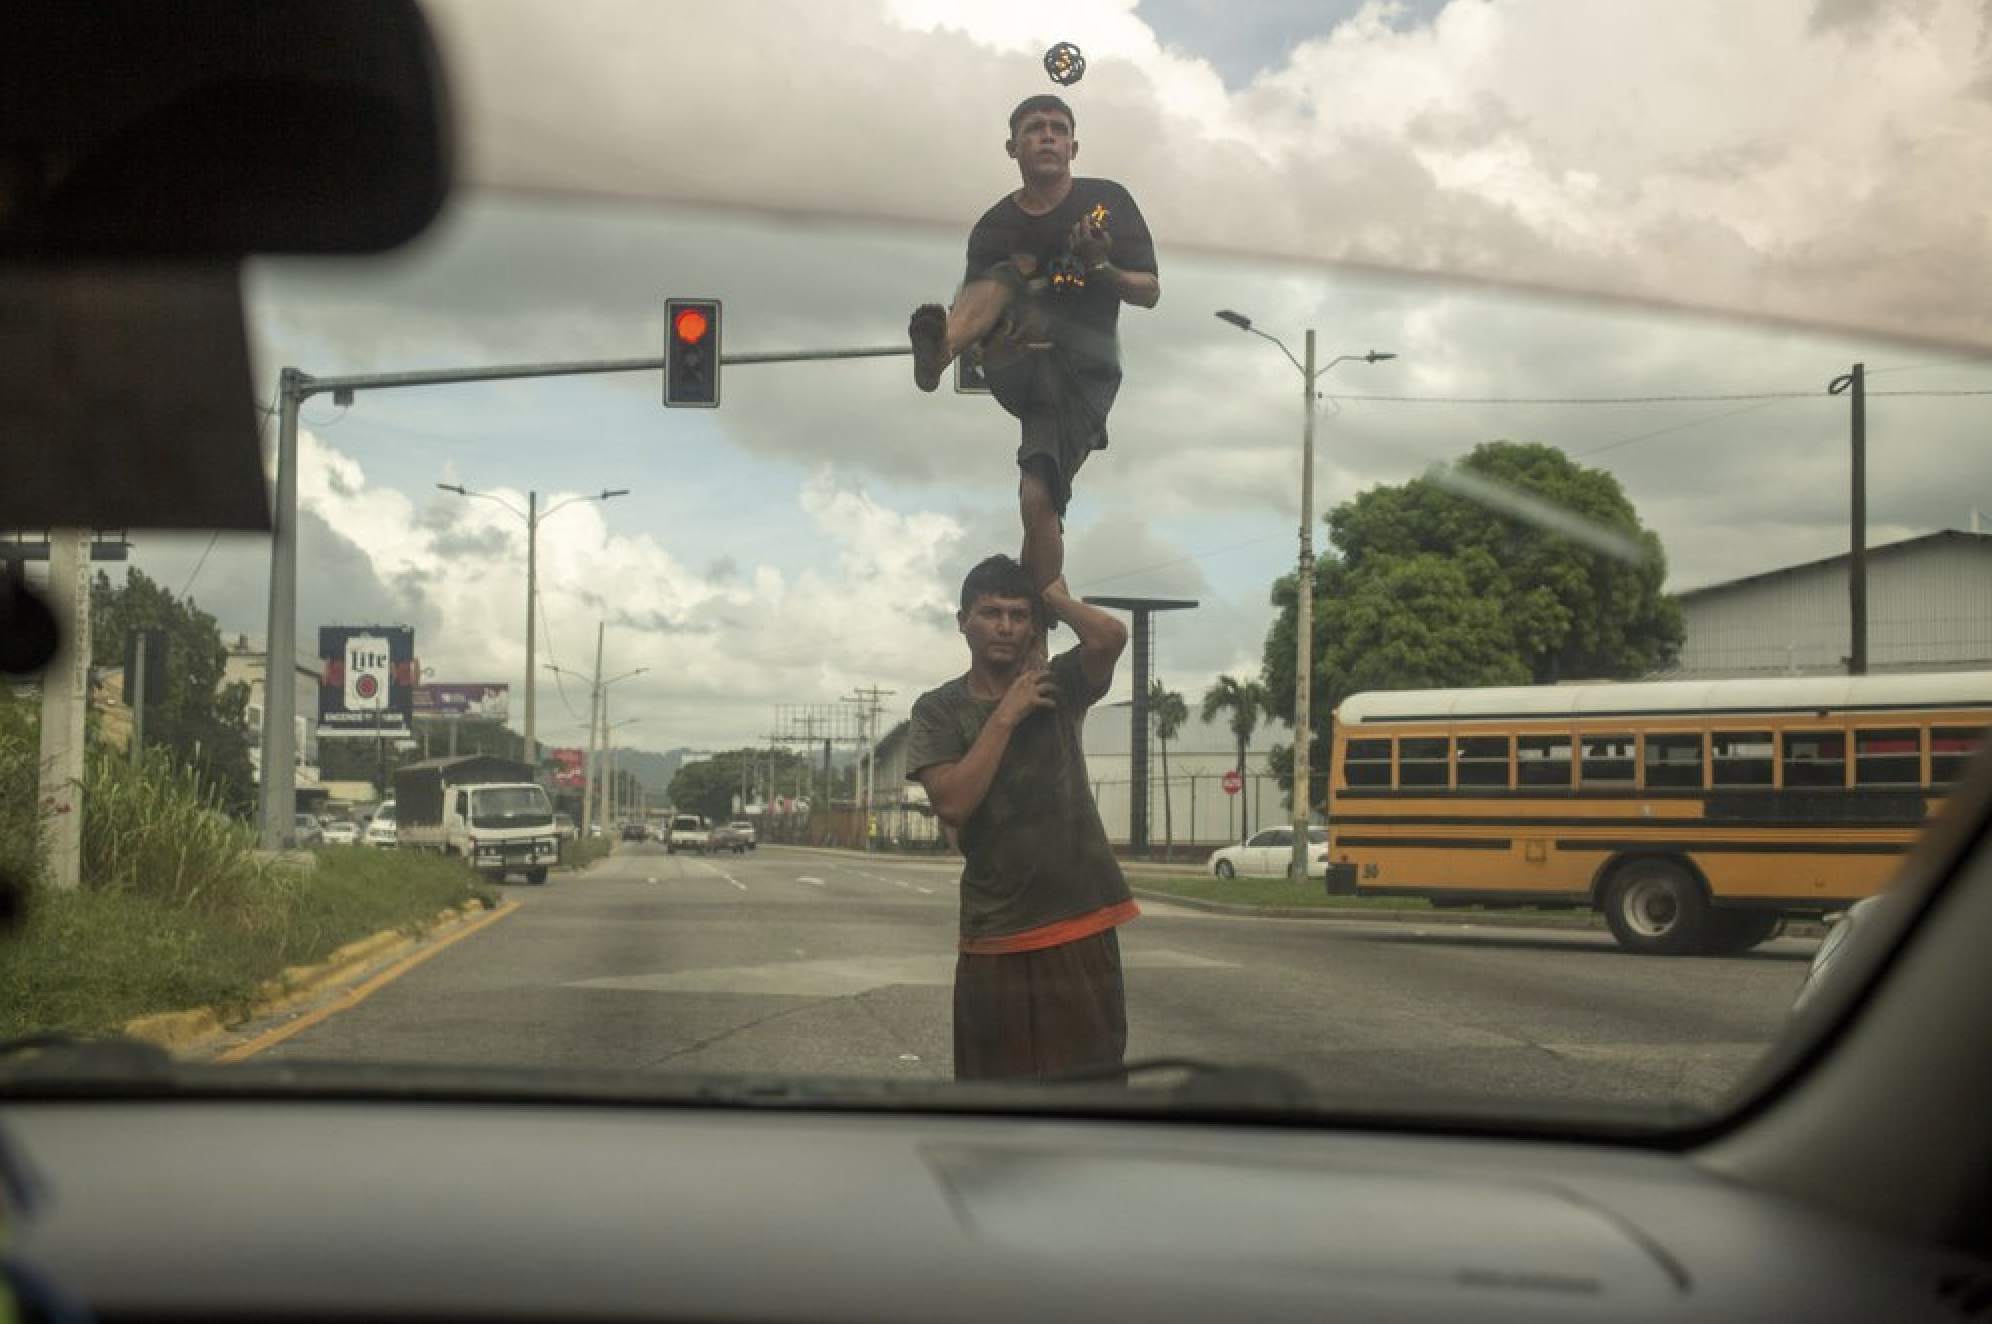 Two street jugglers perform on a corner for money in San Pedro Sula, Honduras on Nov. 28, 2019. The city's criminal life is dominated by two street gangs formed decades earlier in Latino enclaves of Los Angeles, spreading southward as gang members were deported. Today, MS-13 and Mara 18 are the most powerful and feared gangs in Central America, and have operations that reach from Mexico to the U.S. to Europe. Image by Moises Castillo/ AP Photo. Honduras, 2019.